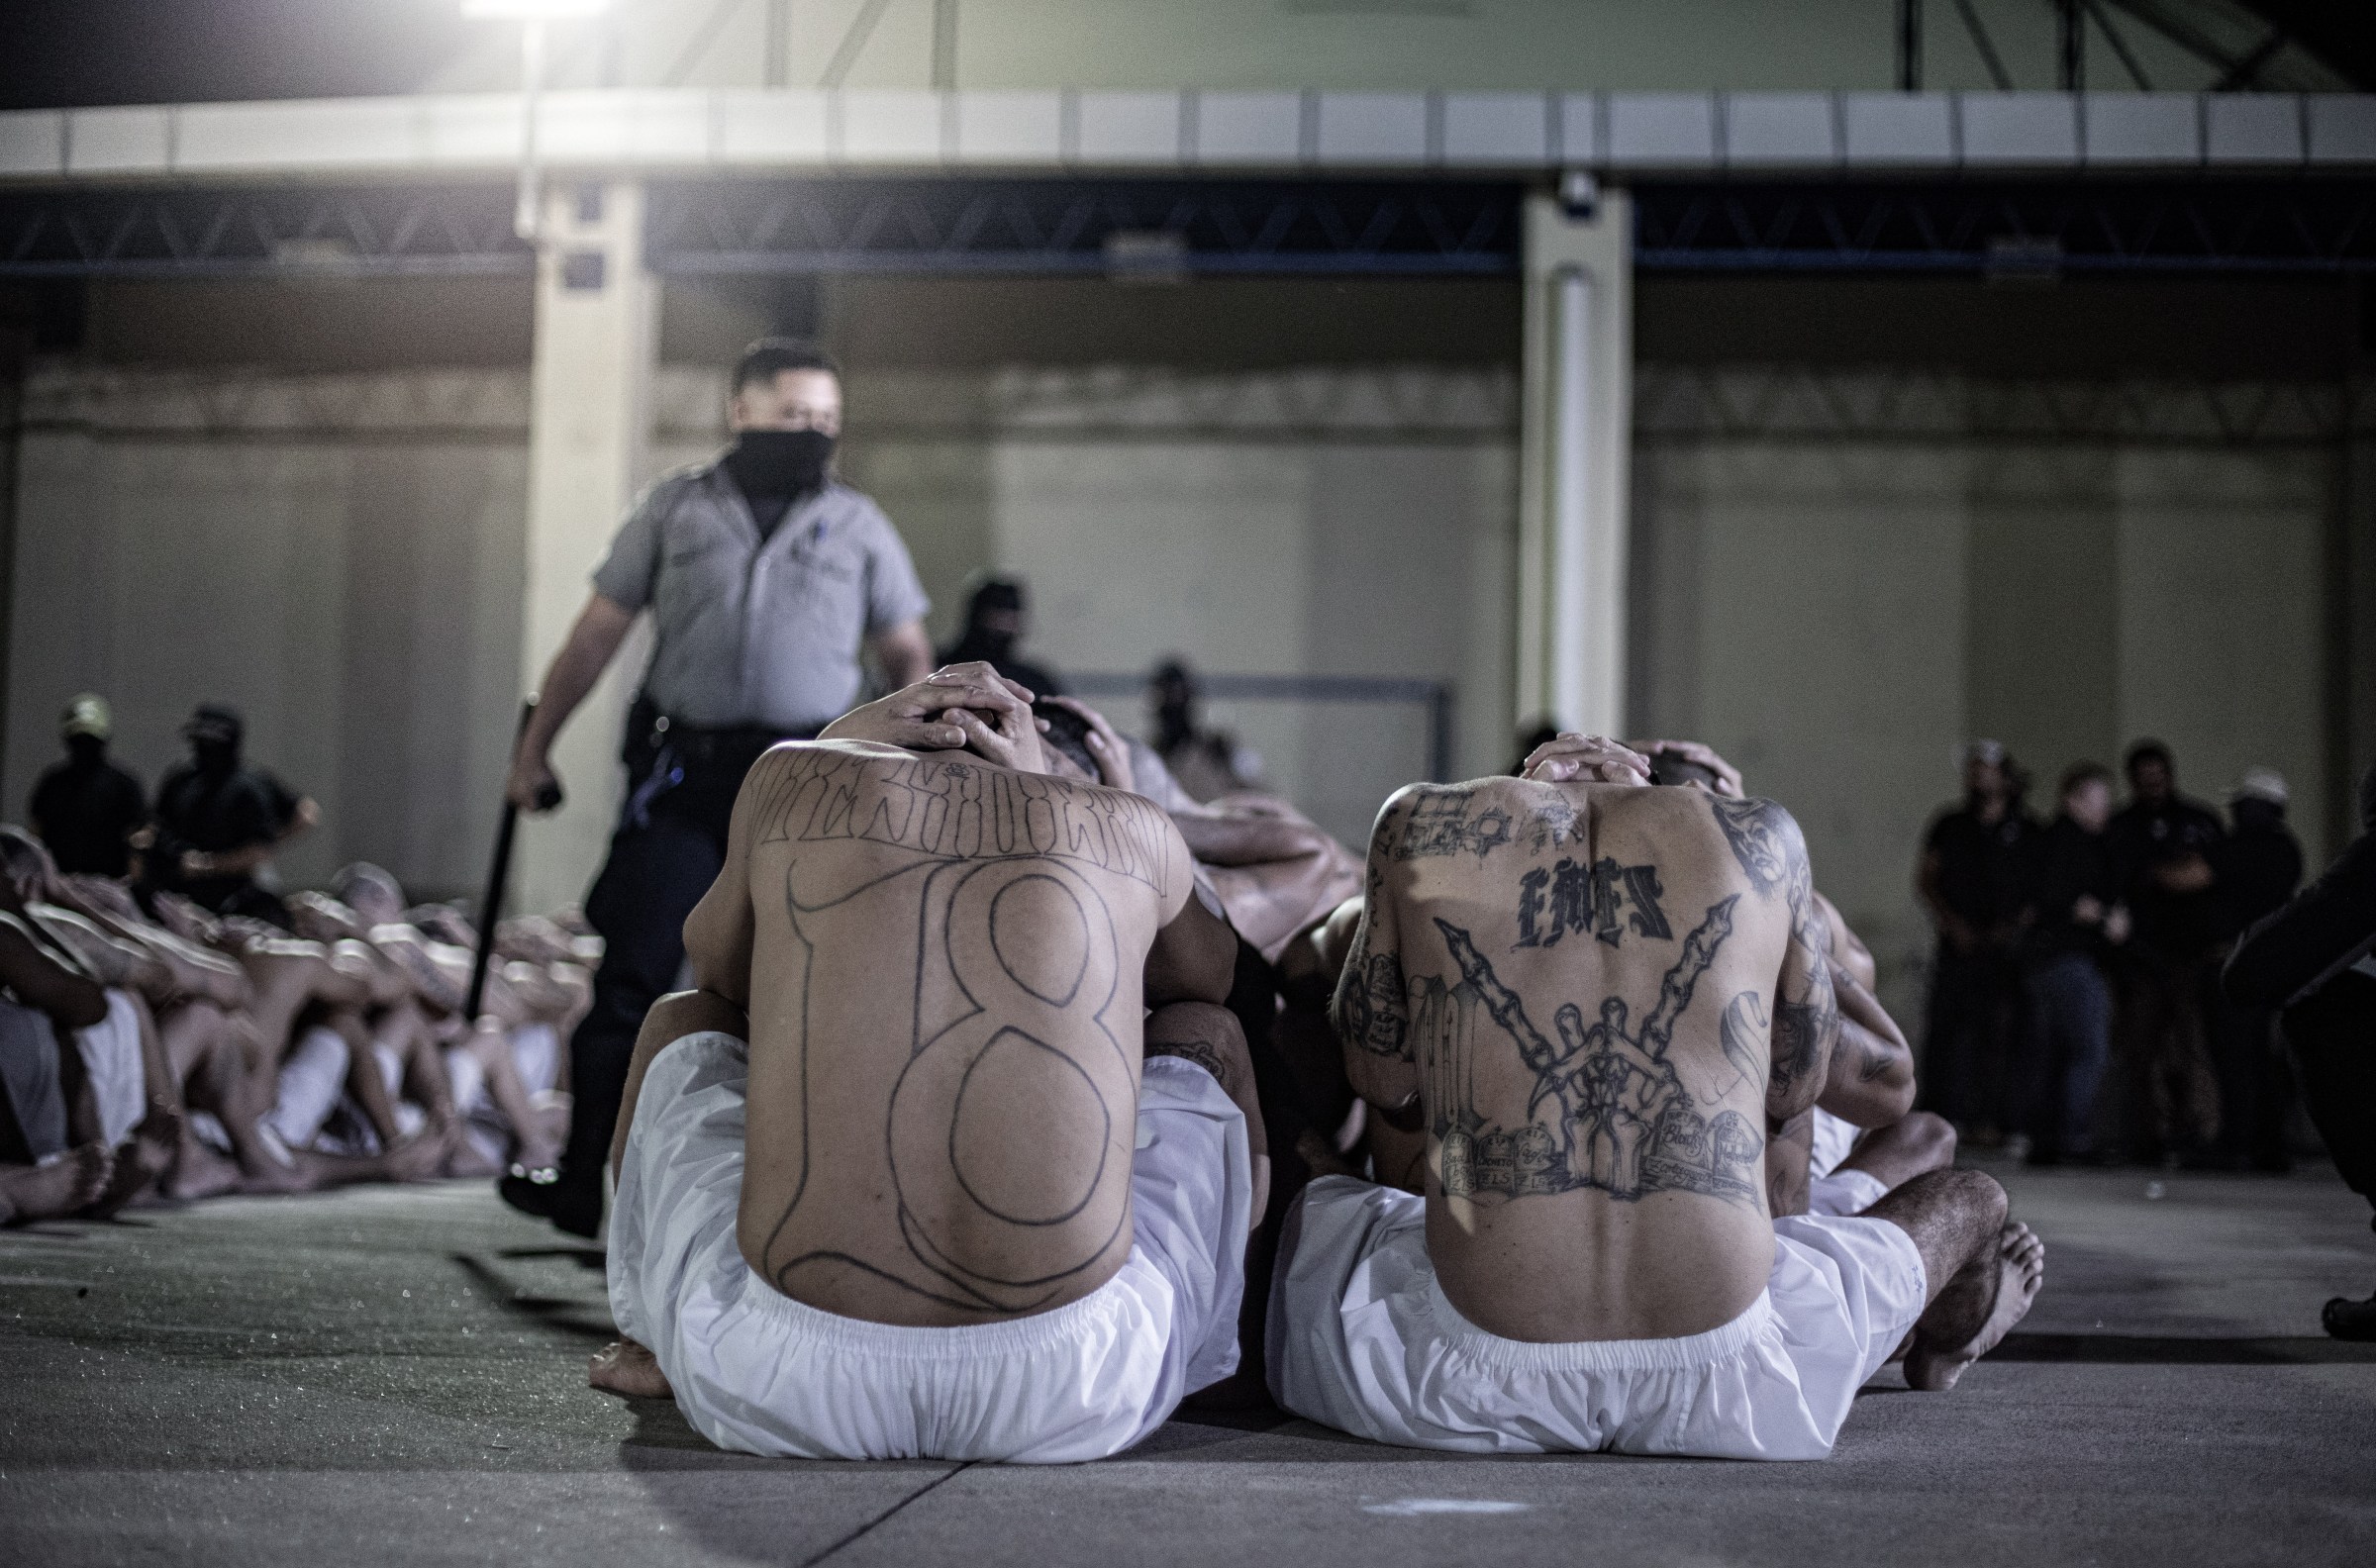 Why Latin American leaders are obsessed with mega prisons